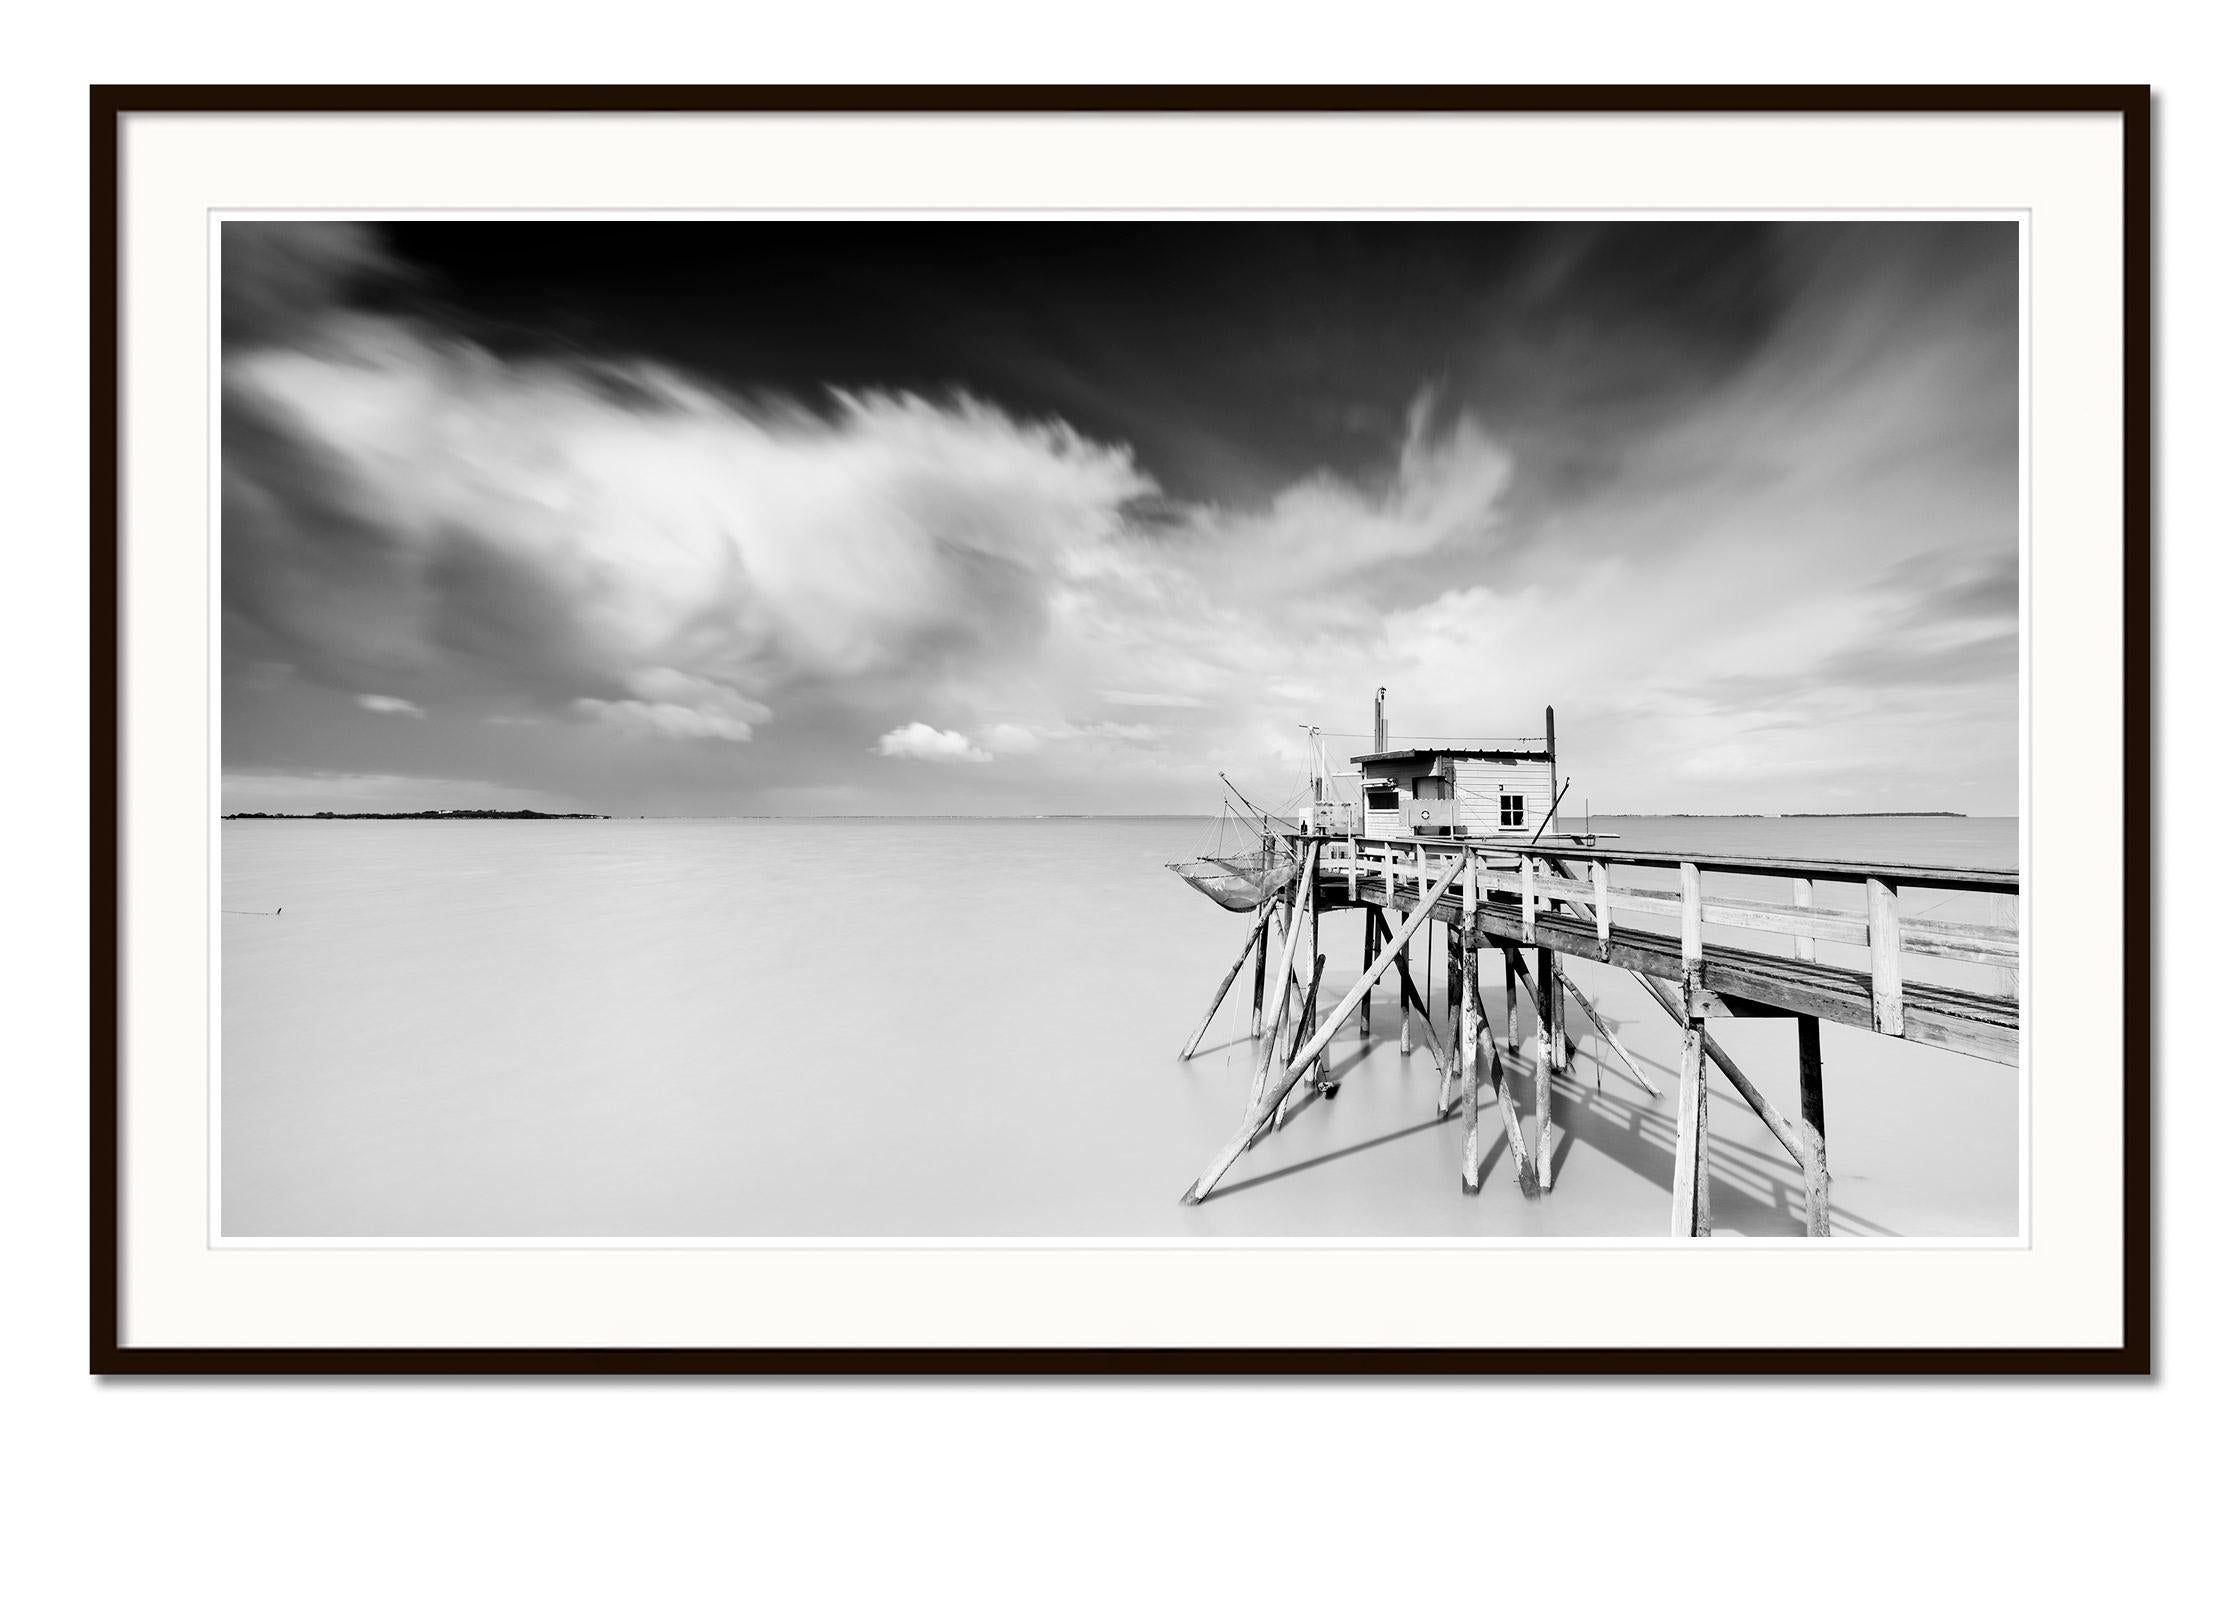 Fishing Hut on Stilts, Panorama, giant Clouds, fine art landscape photography - Gray Black and White Photograph by Gerald Berghammer